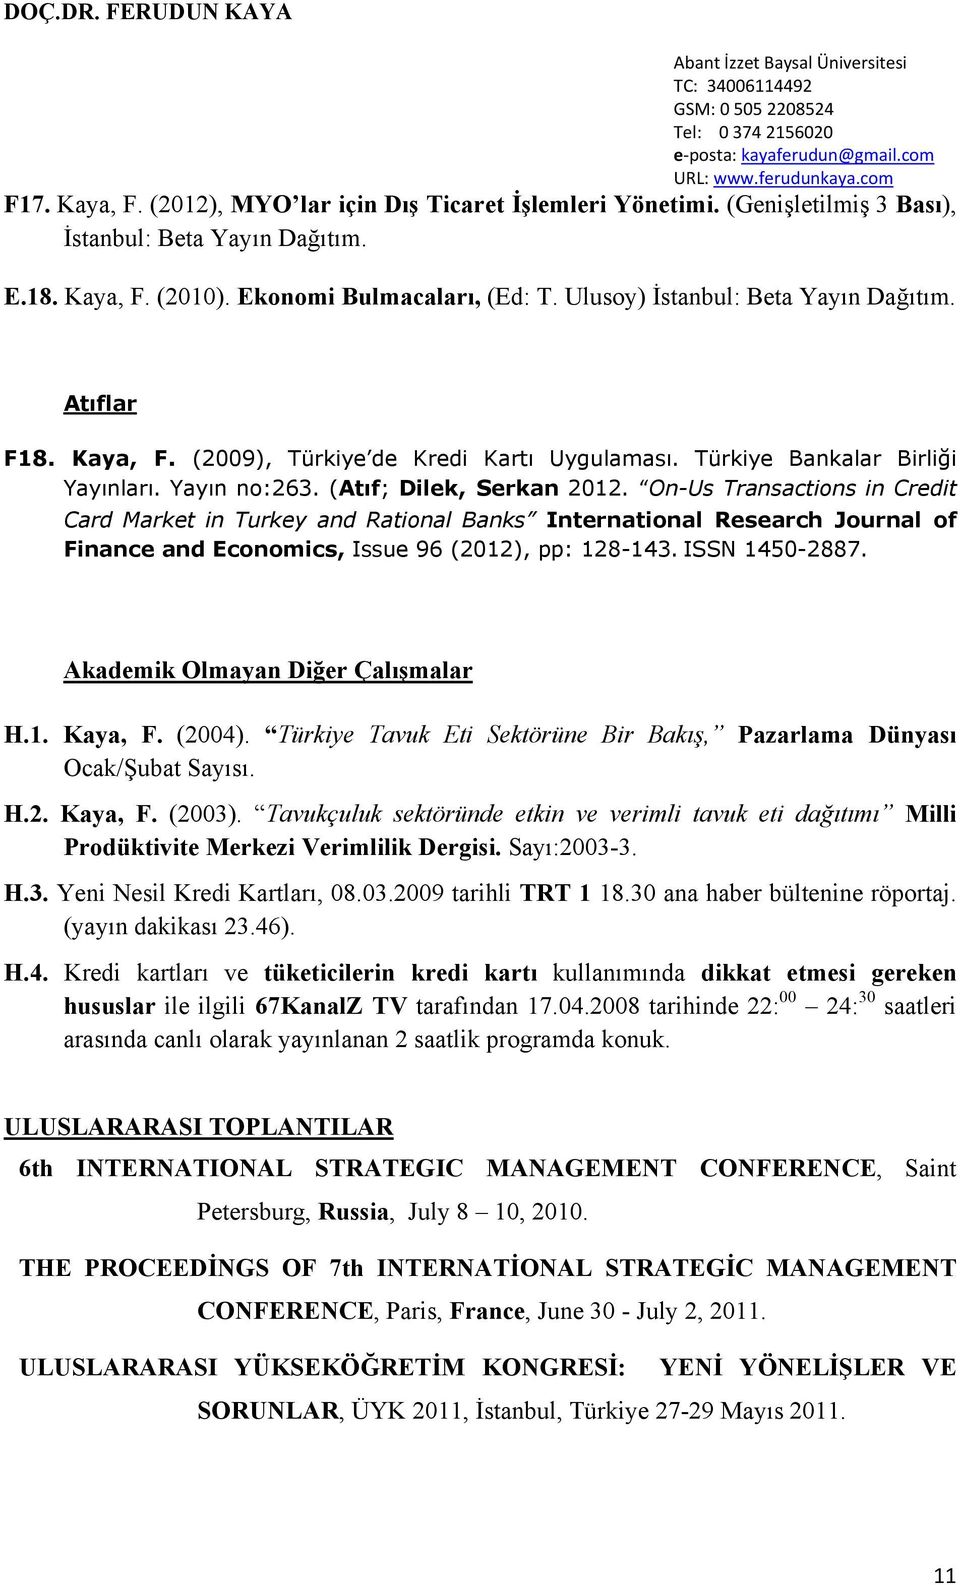 On-Us Transactions in Credit Card Market in Turkey and Rational Banks International Research Journal of Finance and Economics, Issue 96 (2012), pp: 128-143. ISSN 1450-2887.